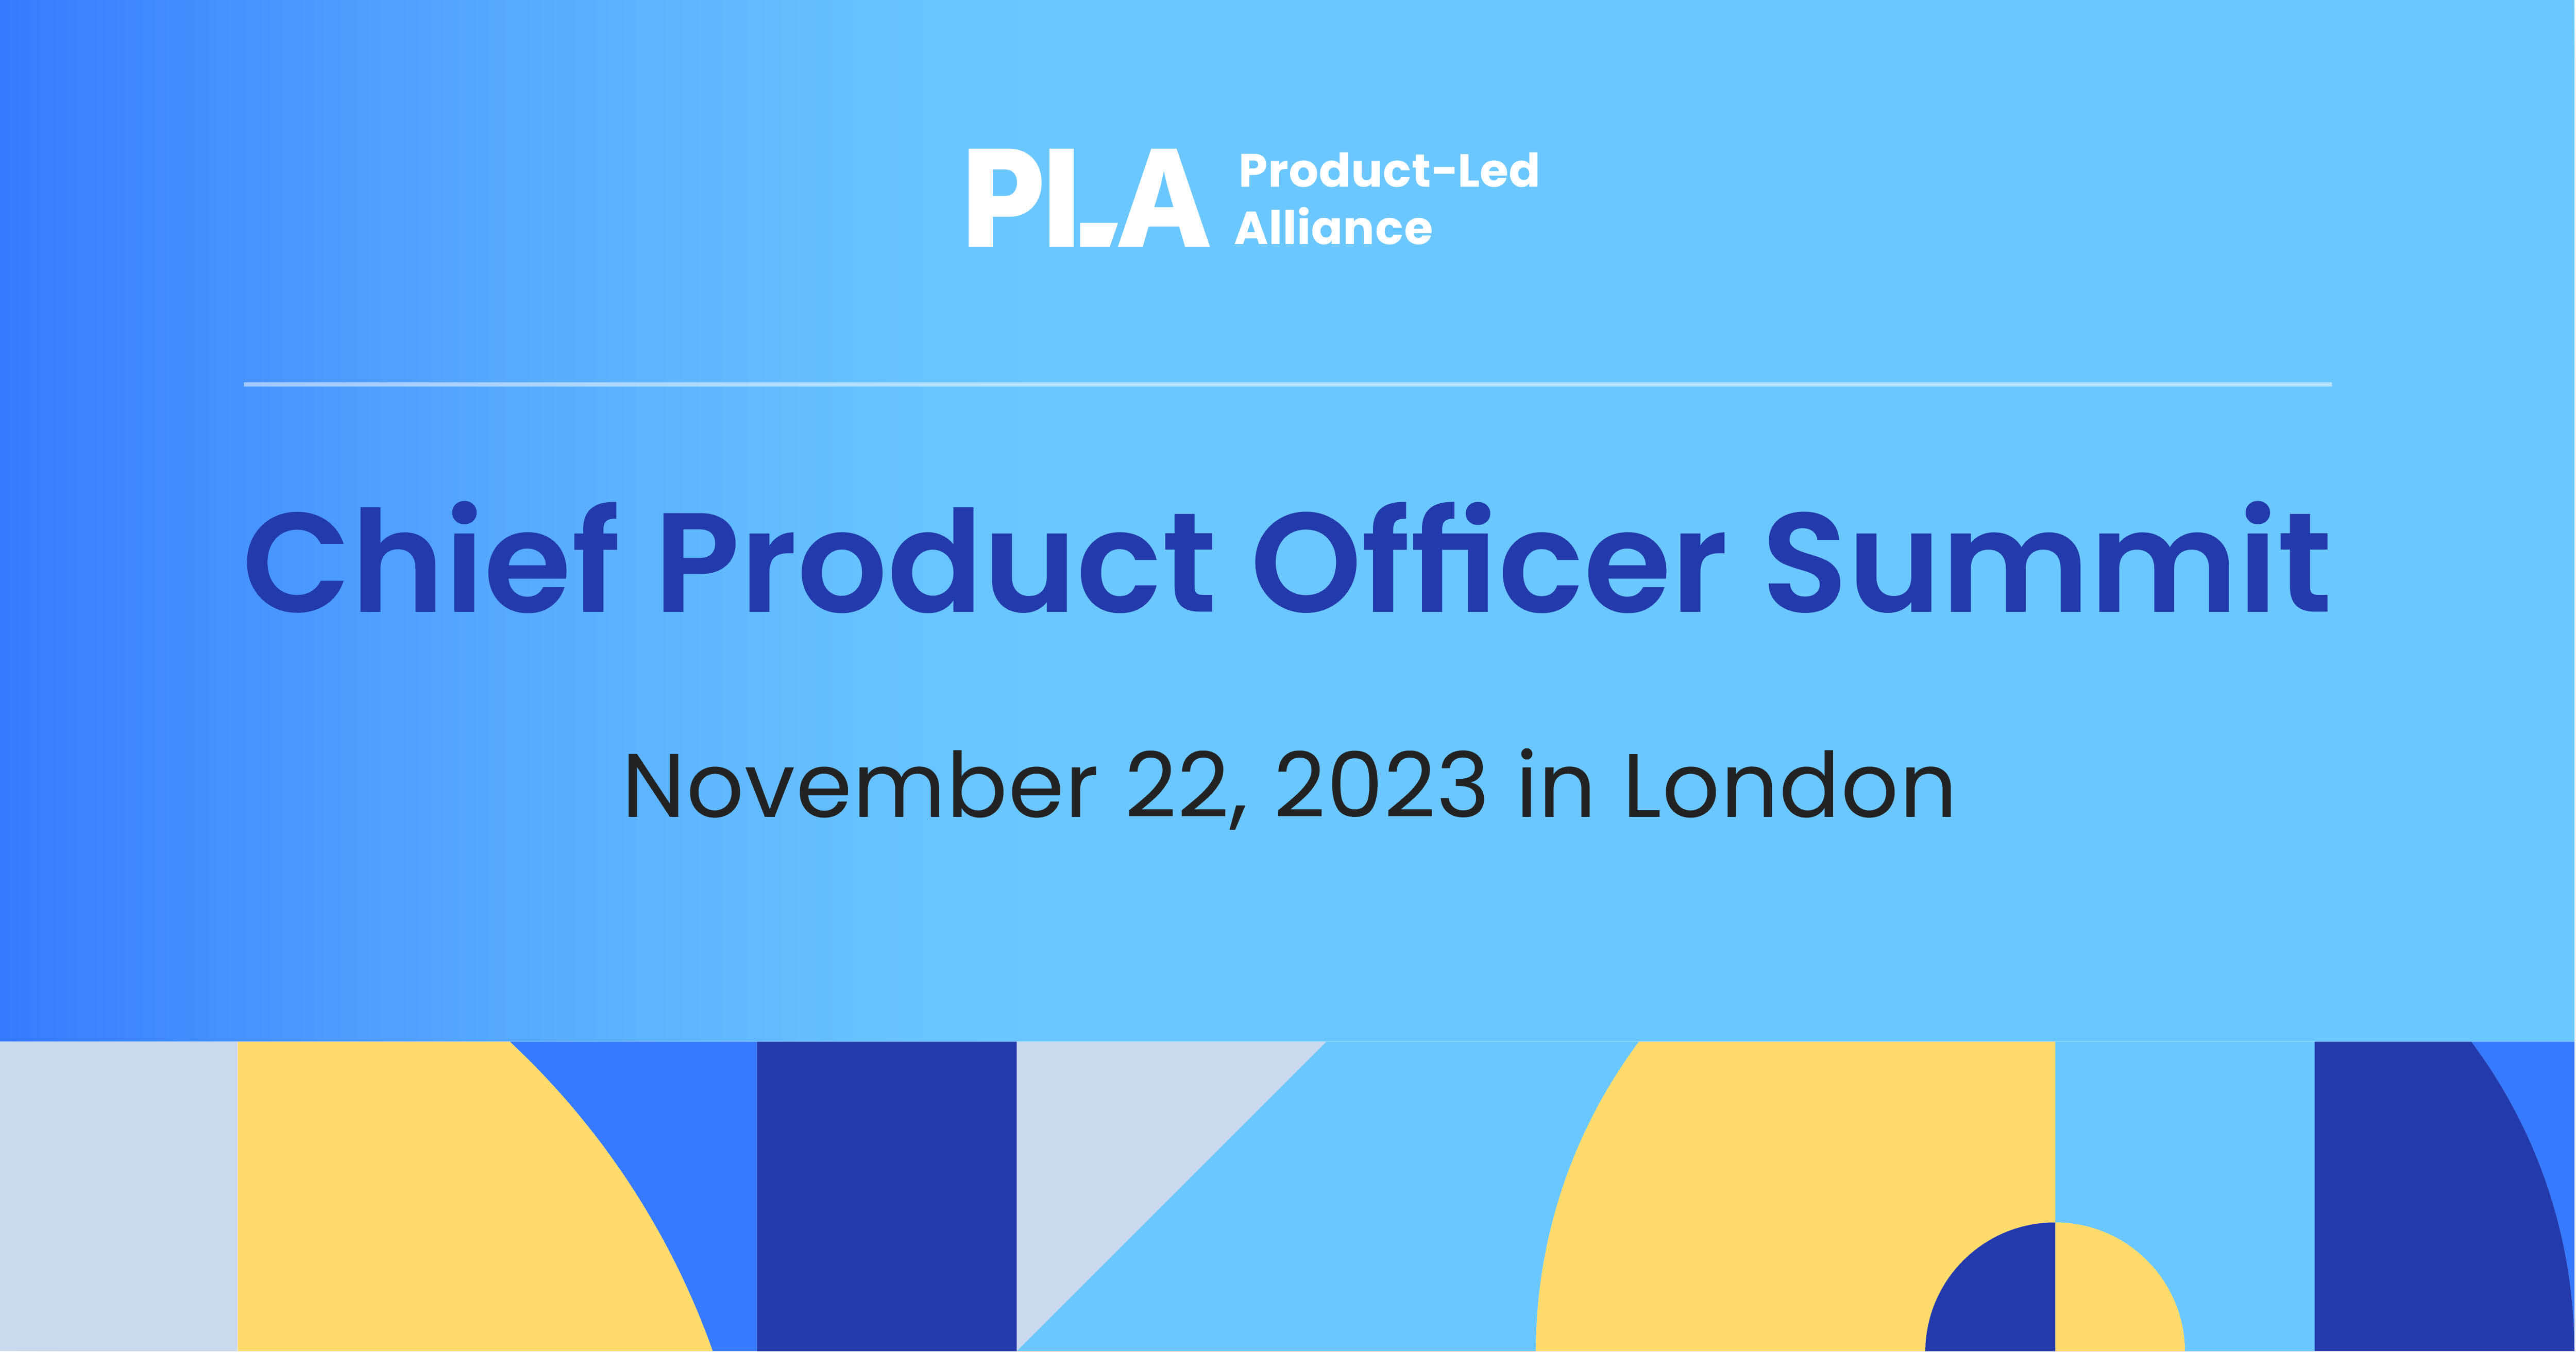  Chief Product Officer Summit London 